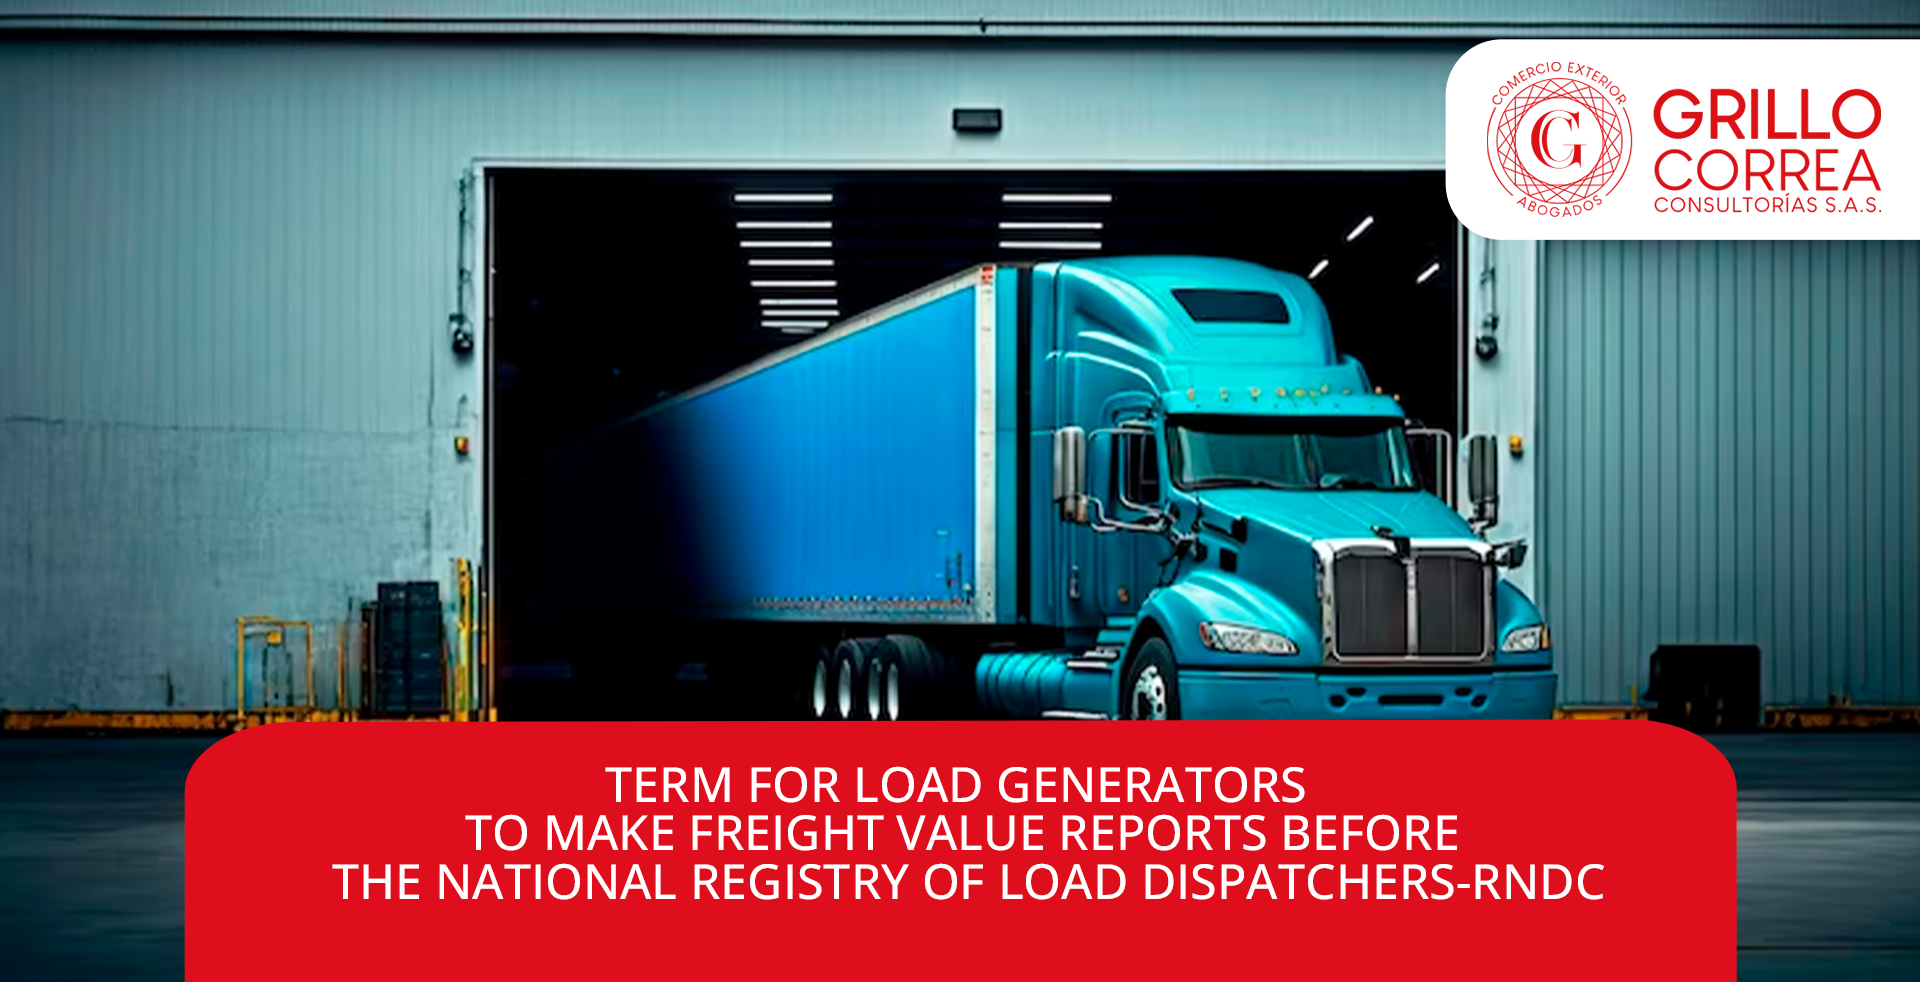 TERM FOR LOAD GENERATORS TO MAKE FREIGHT VALUE REPORTS BEFORE THE NATIONAL REGISTRY OF LOAD DISPATCHERS-RNDC